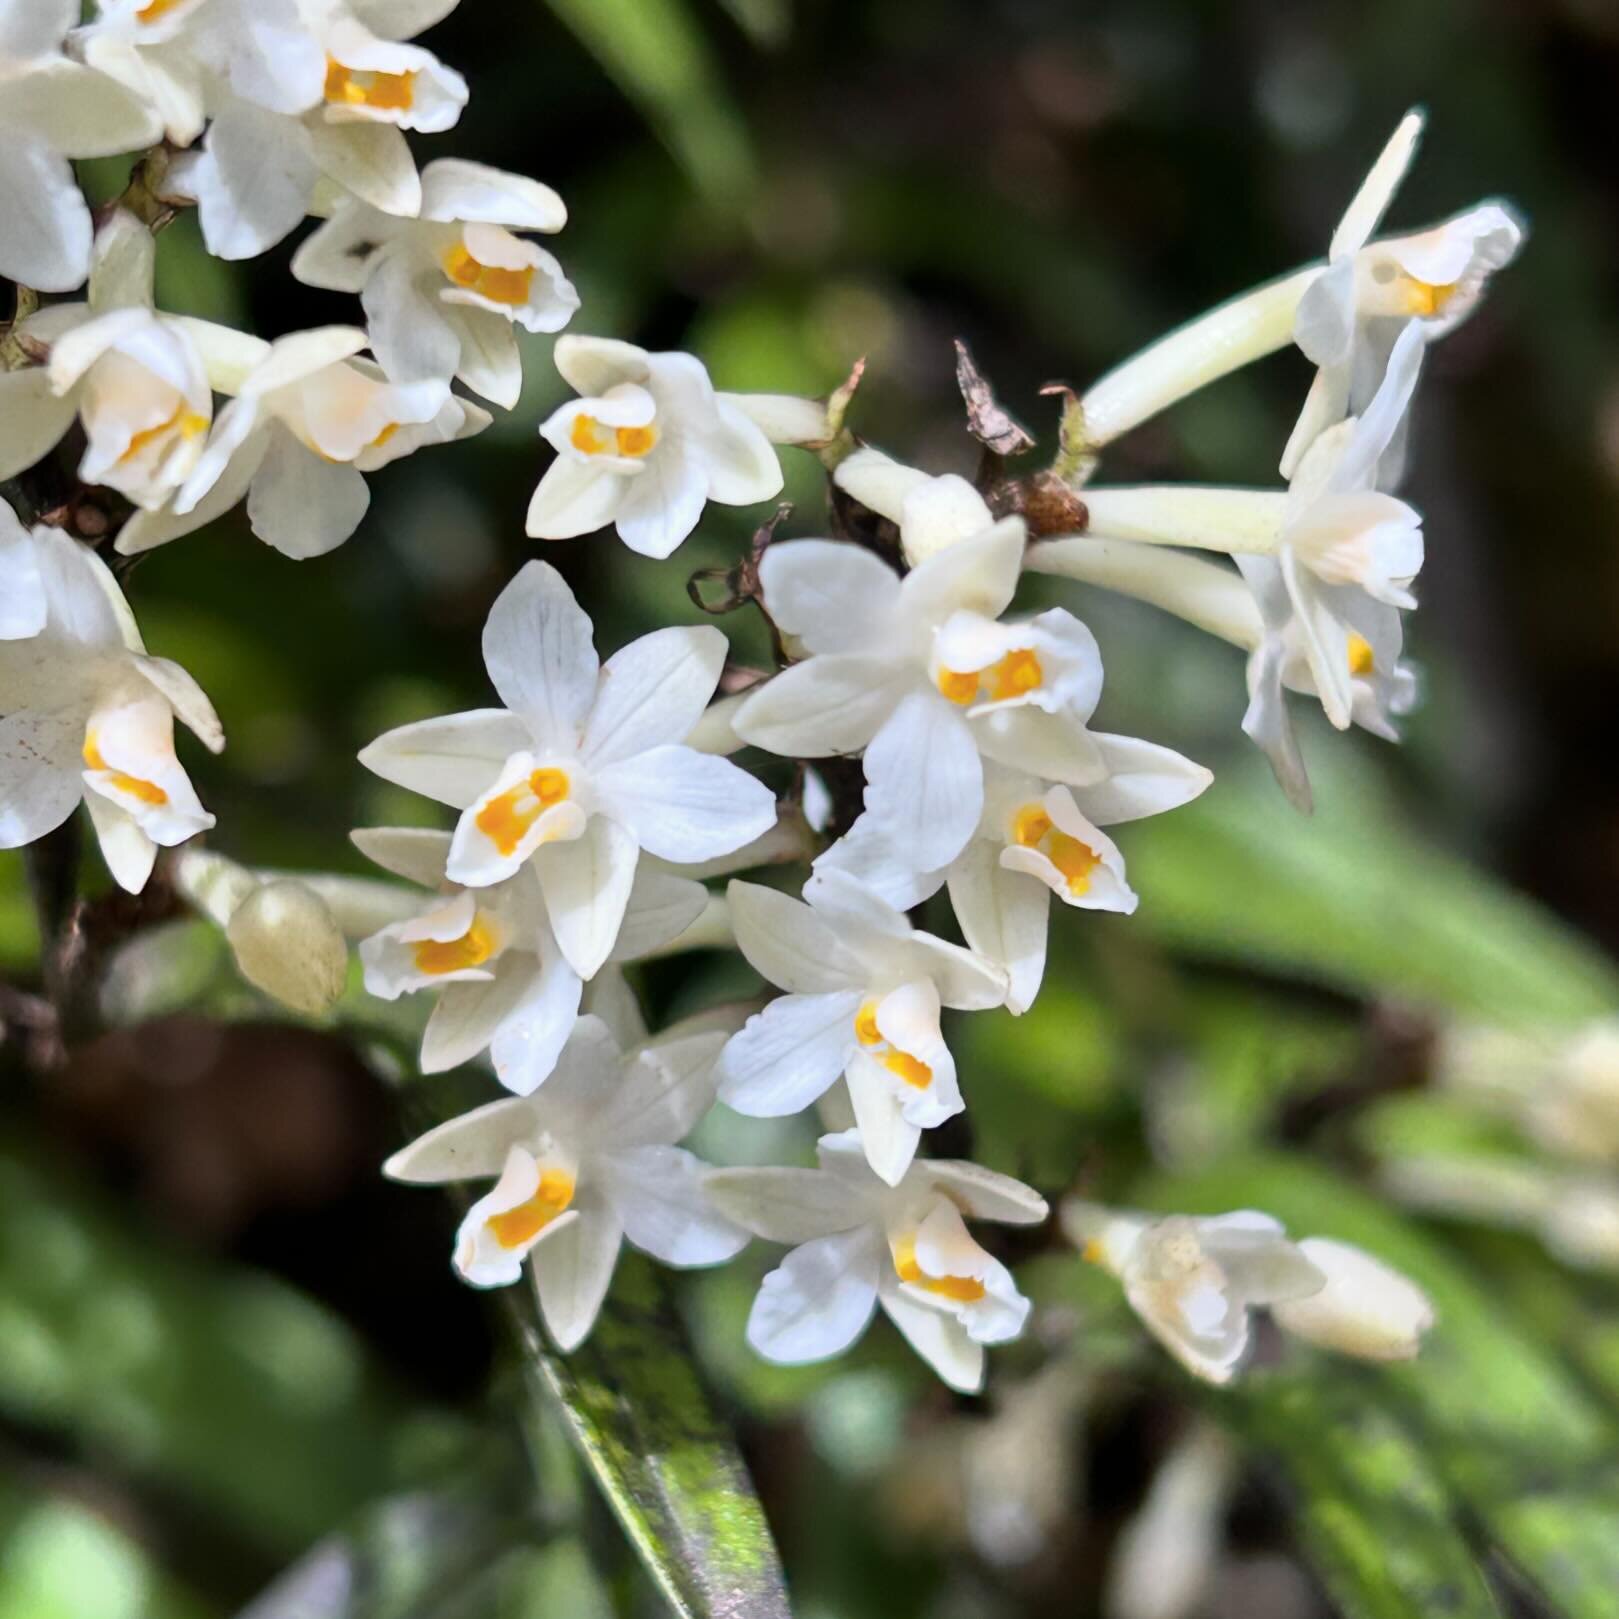 Raupeka orchids have such a lovely vanilla-like scent, especially when there are crowds of them. #earinaautumnalis #raupeka #easterorchids